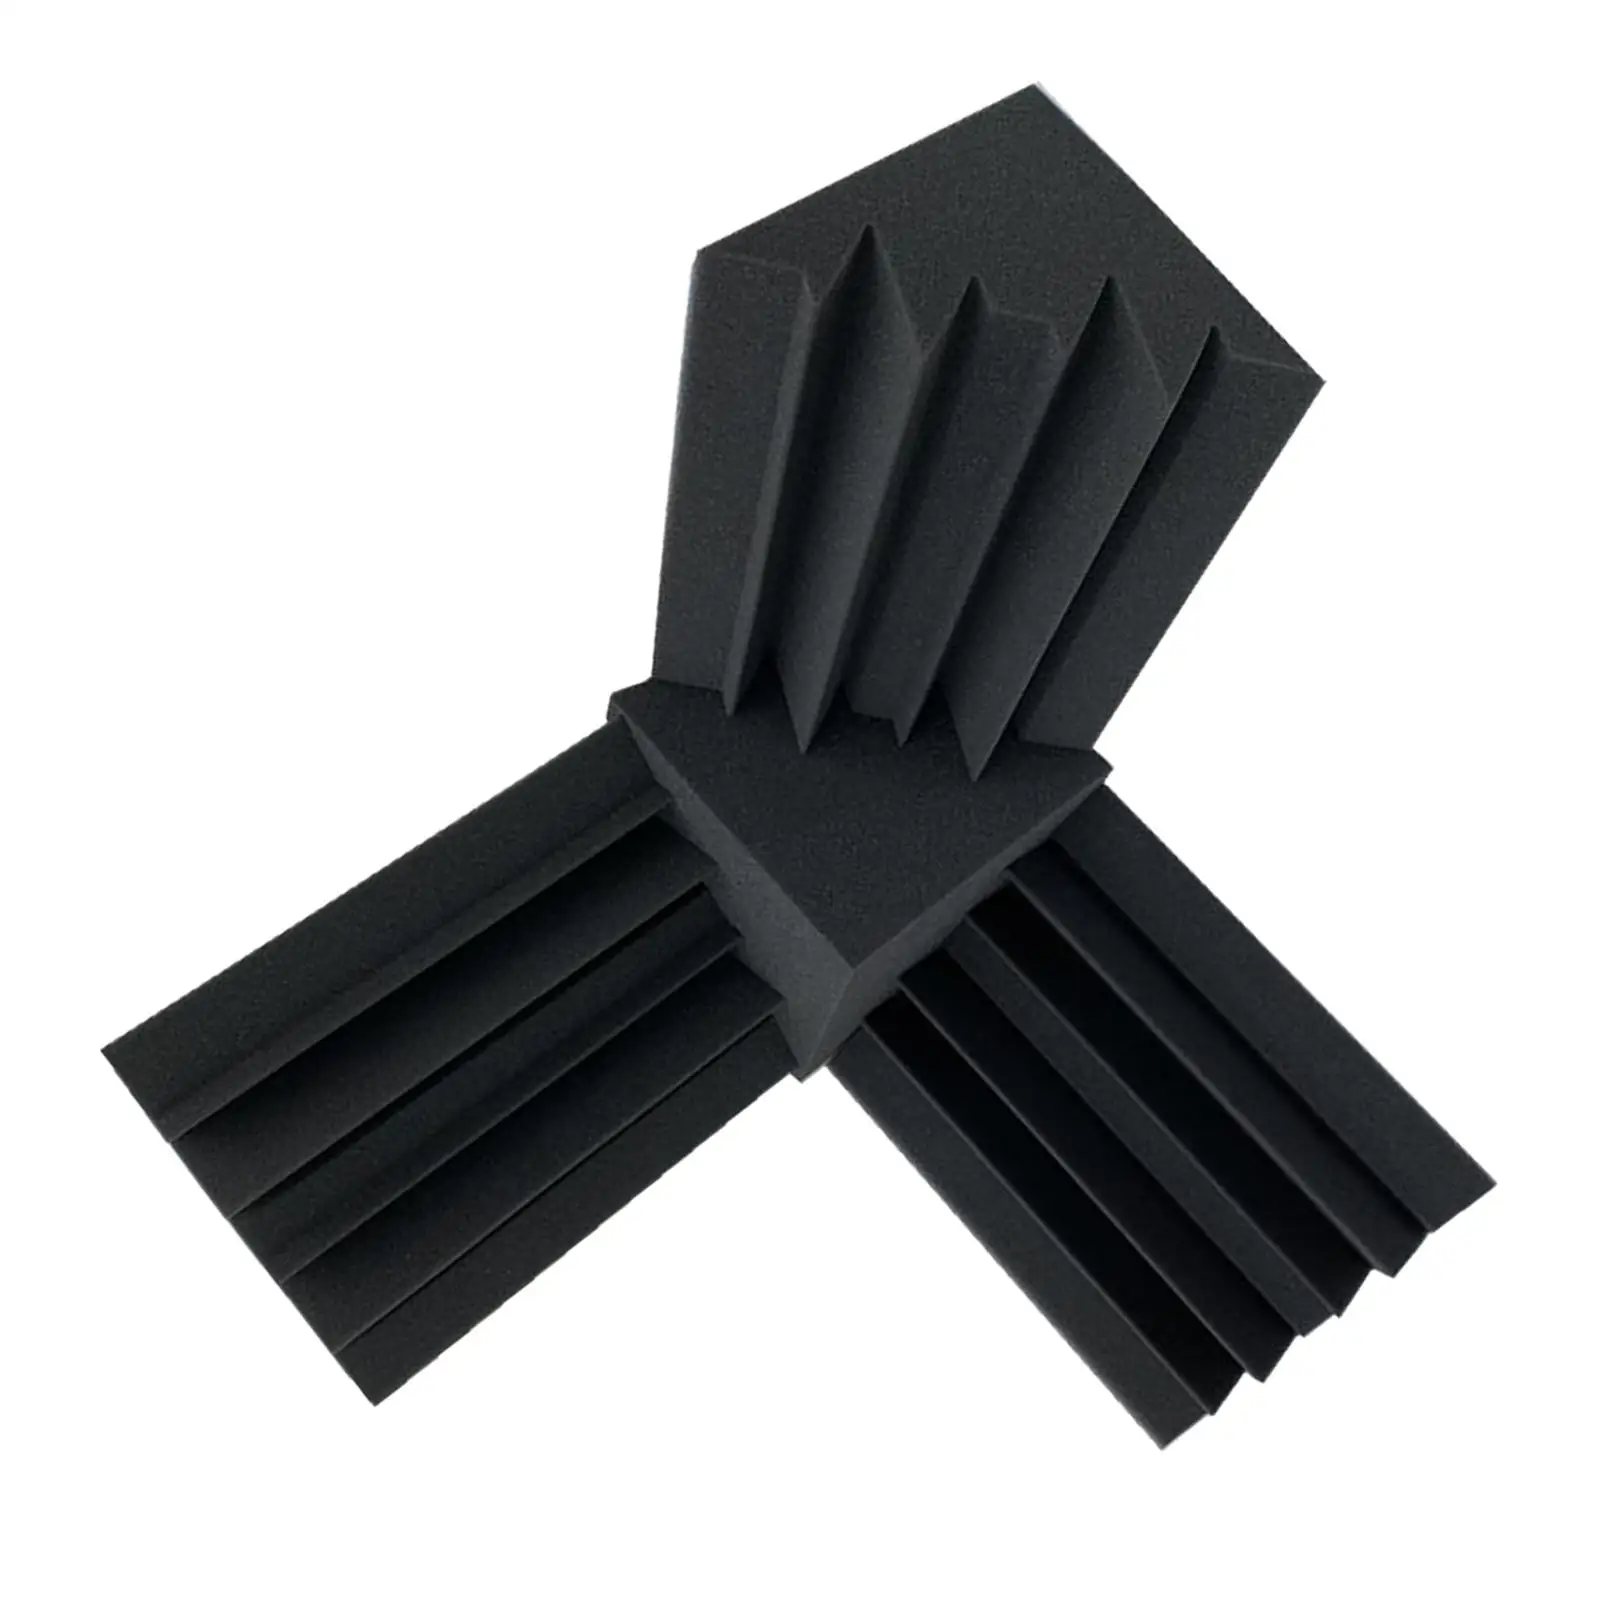 4 Pieces Sound Absorbing panels Proof High Quality Foam Sound Insulation Wedge Foam Corner Acoustic Foam Panels for Studio